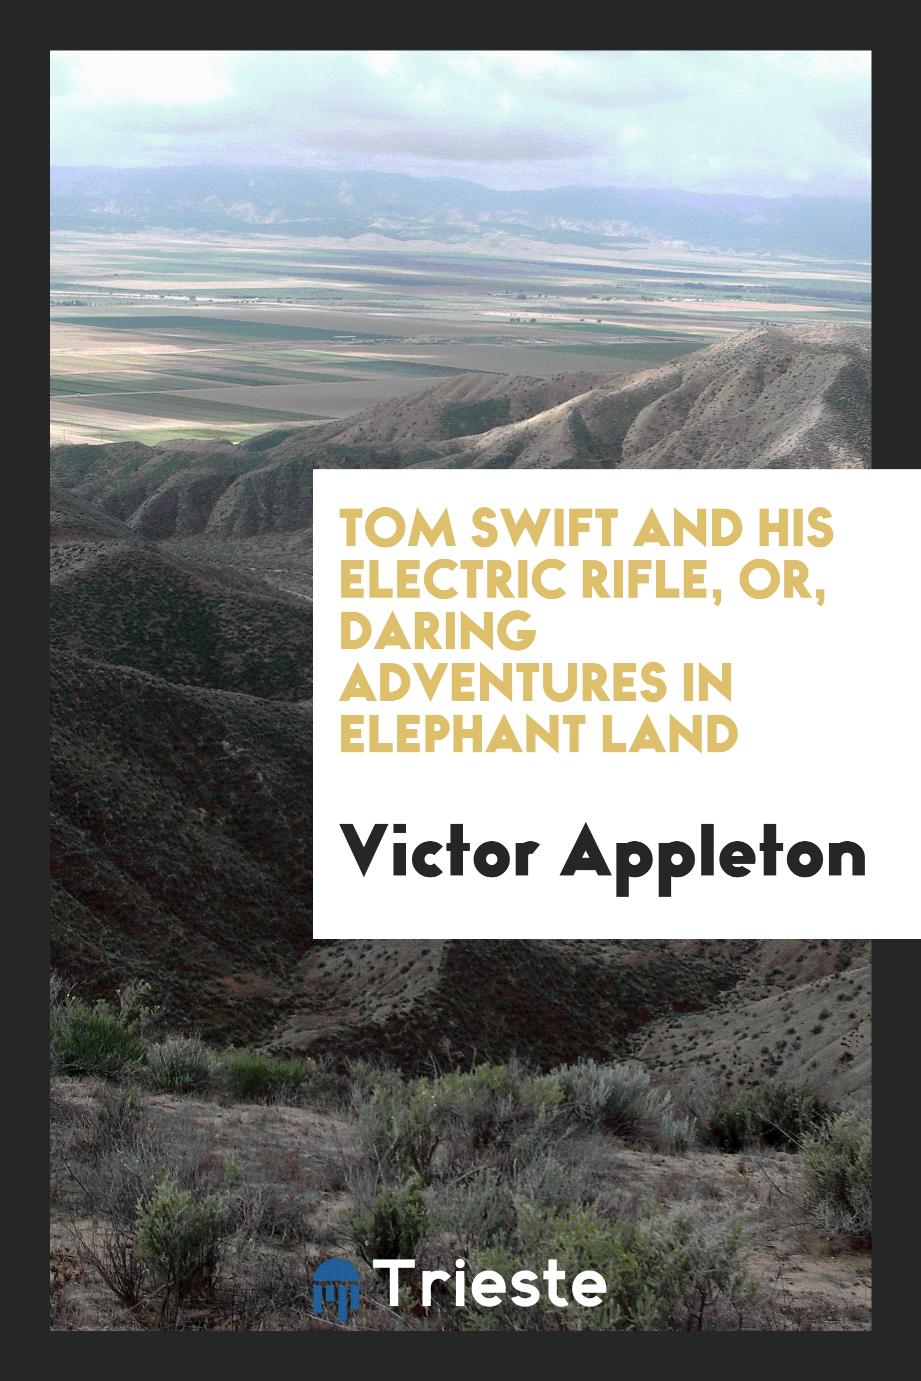 Tom Swift and his electric rifle, or, Daring adventures in elephant land